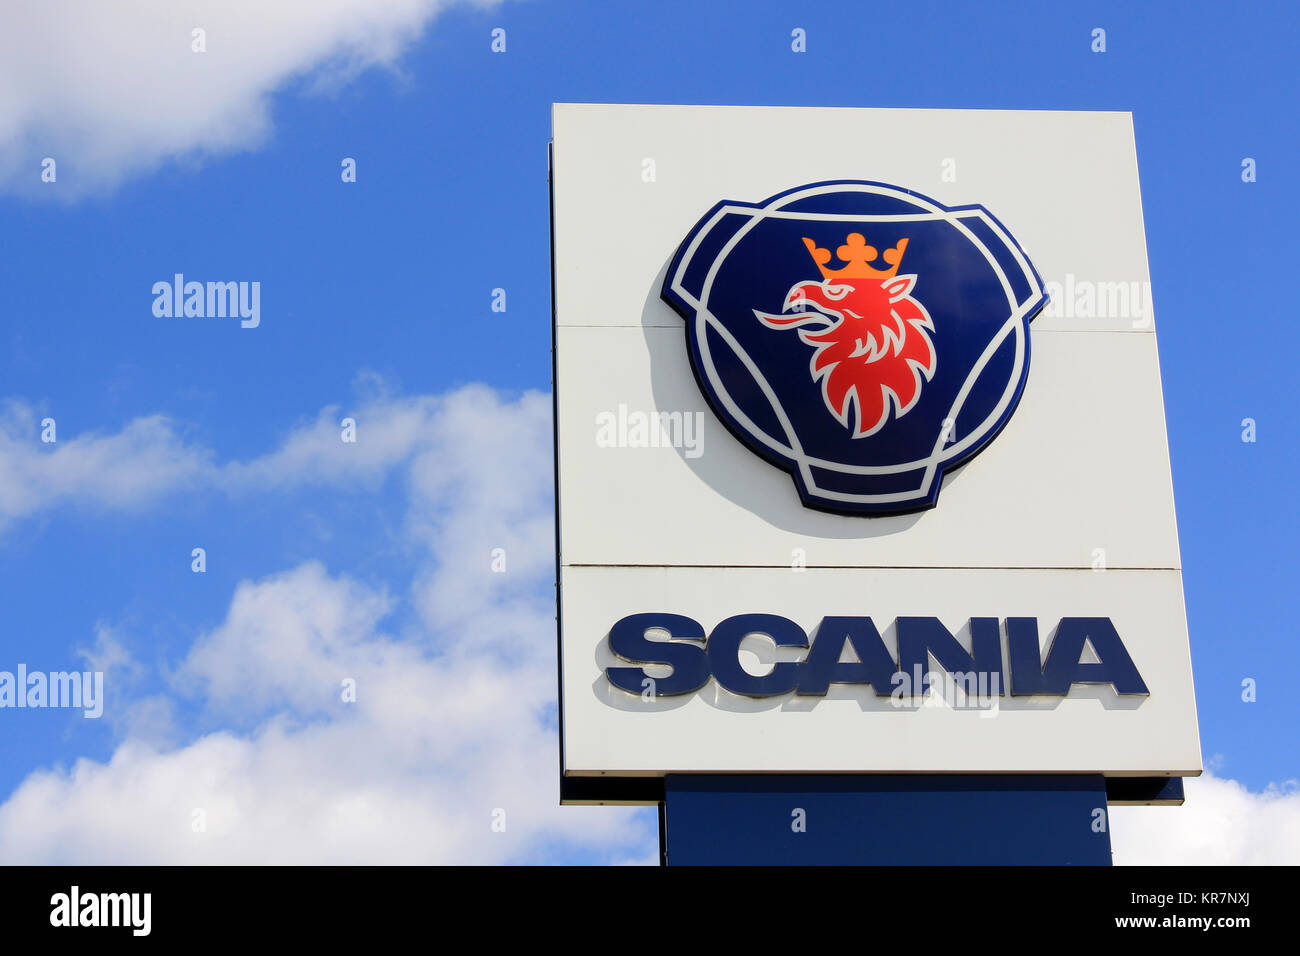 LIETO, FINLAND - AUGUST 3, 2013: Sign Scania against sky.The automotive industry manufacturer Scania AB was founded in 1891 in Sodertalje, Sweden. In  Stock Photo